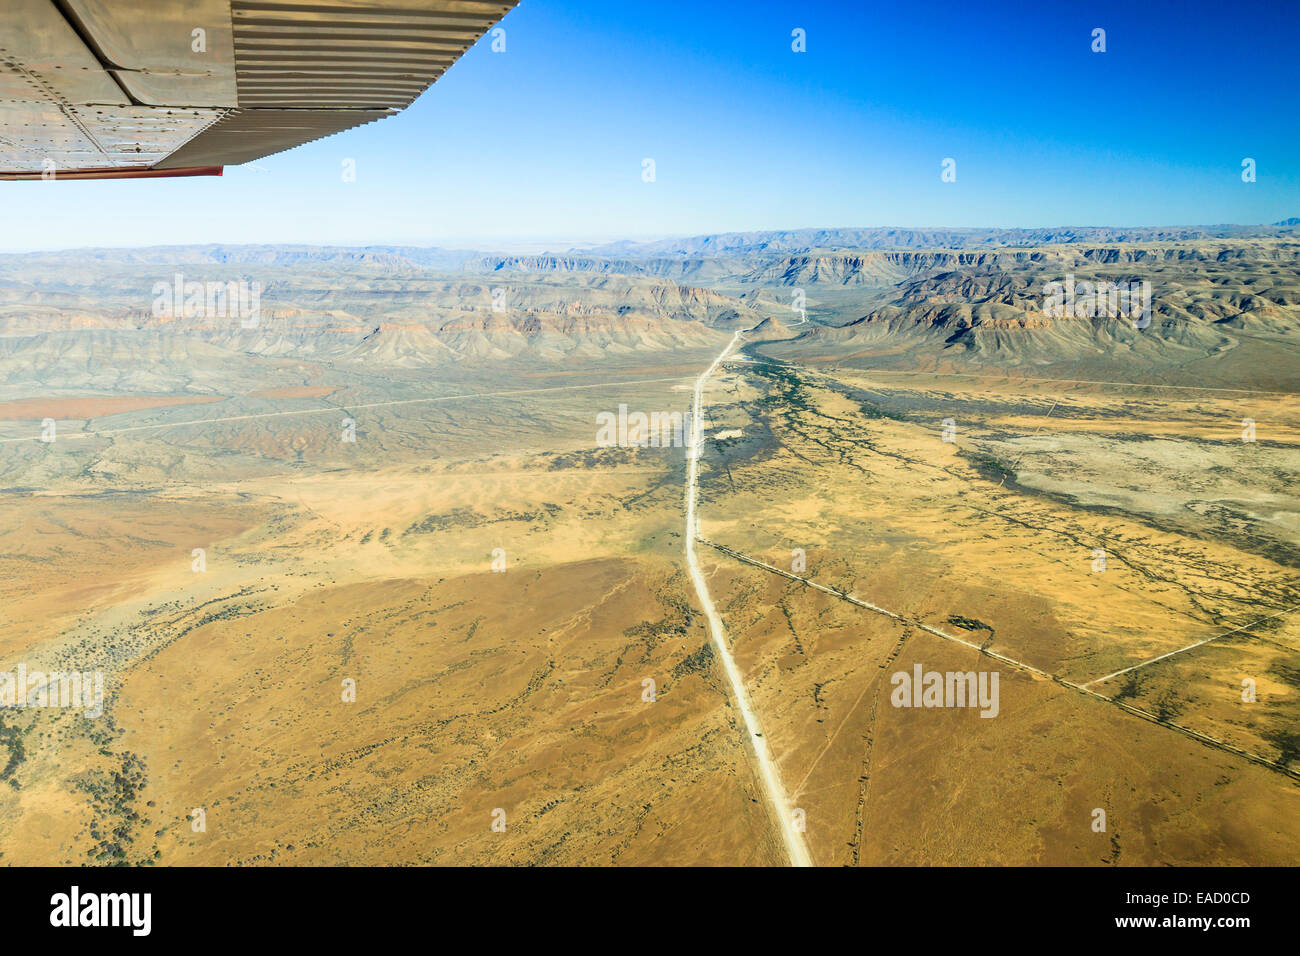 View from a small plane over the sand road C26, disappearing between the mountains in the direction of Gamsberg Pass Stock Photo